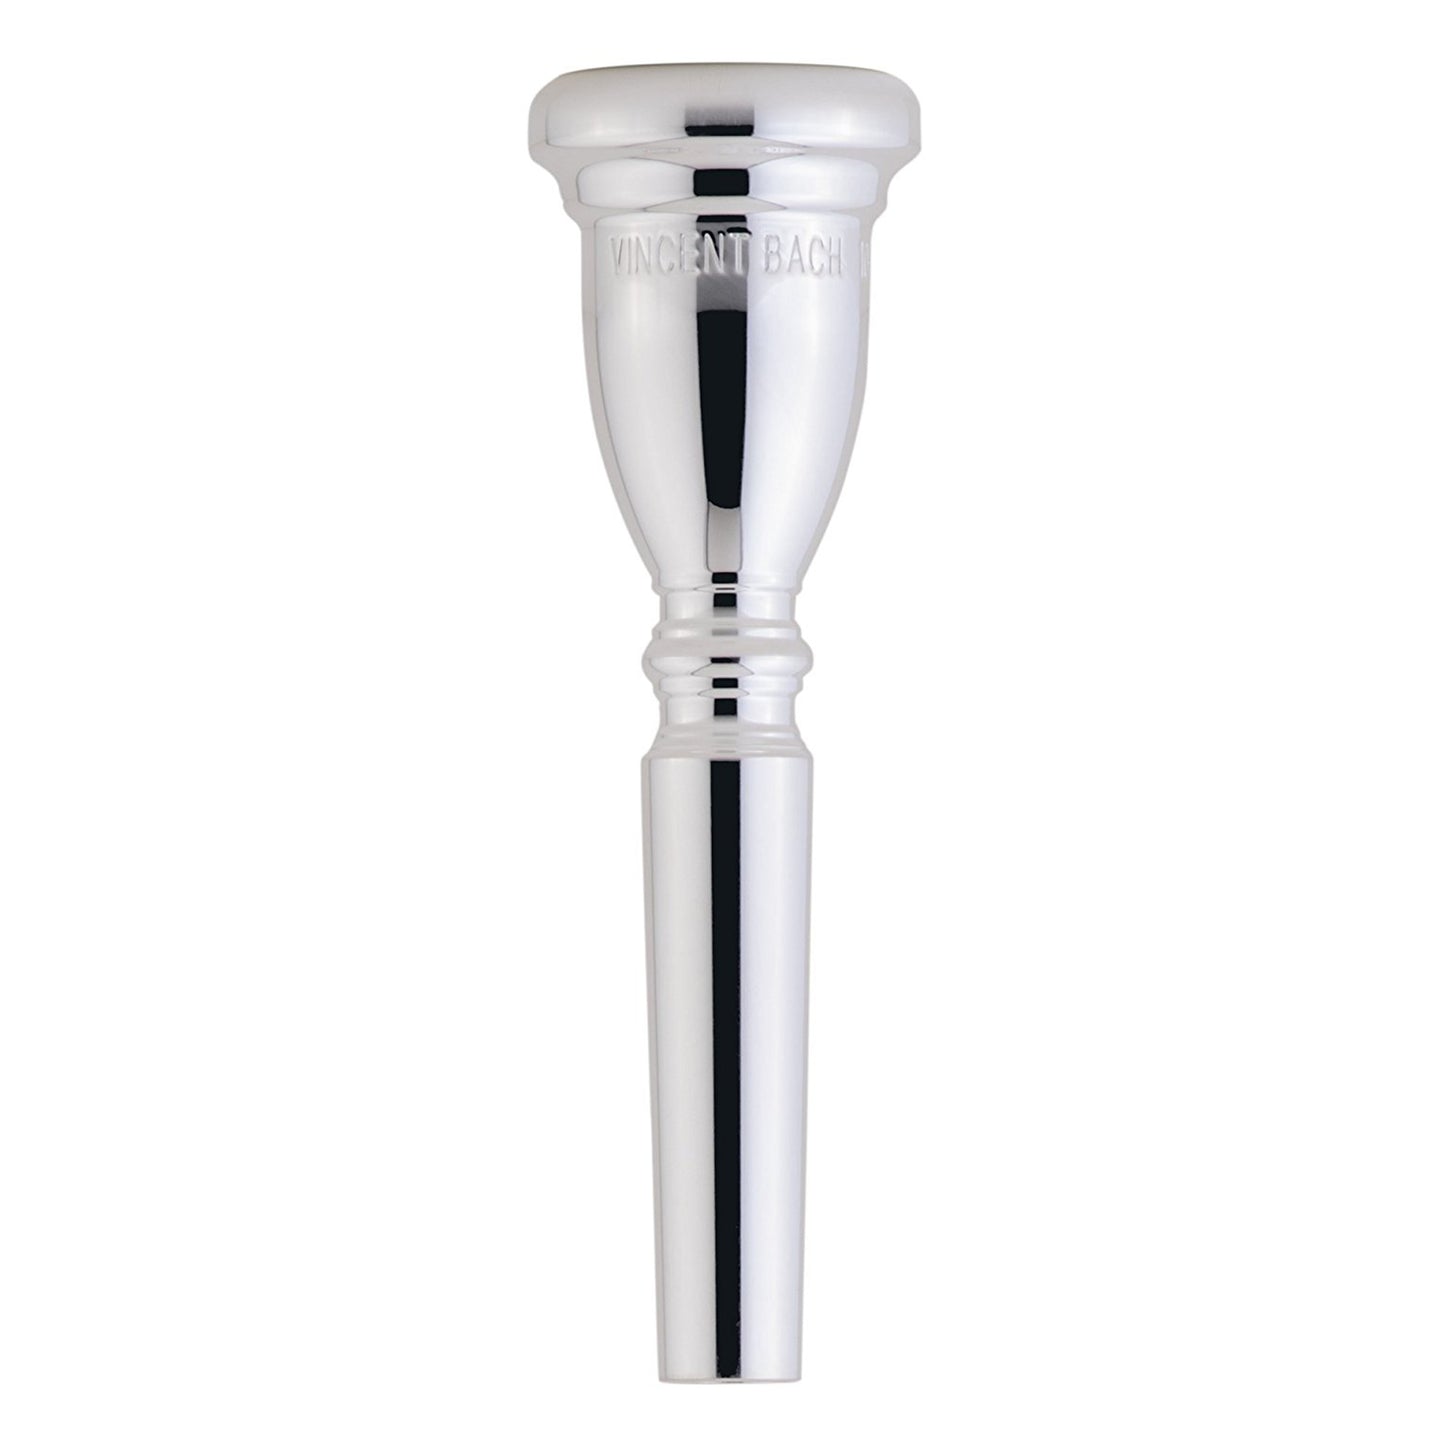 Genuine Bach Commercial Trumpet Mouthpiece 7S